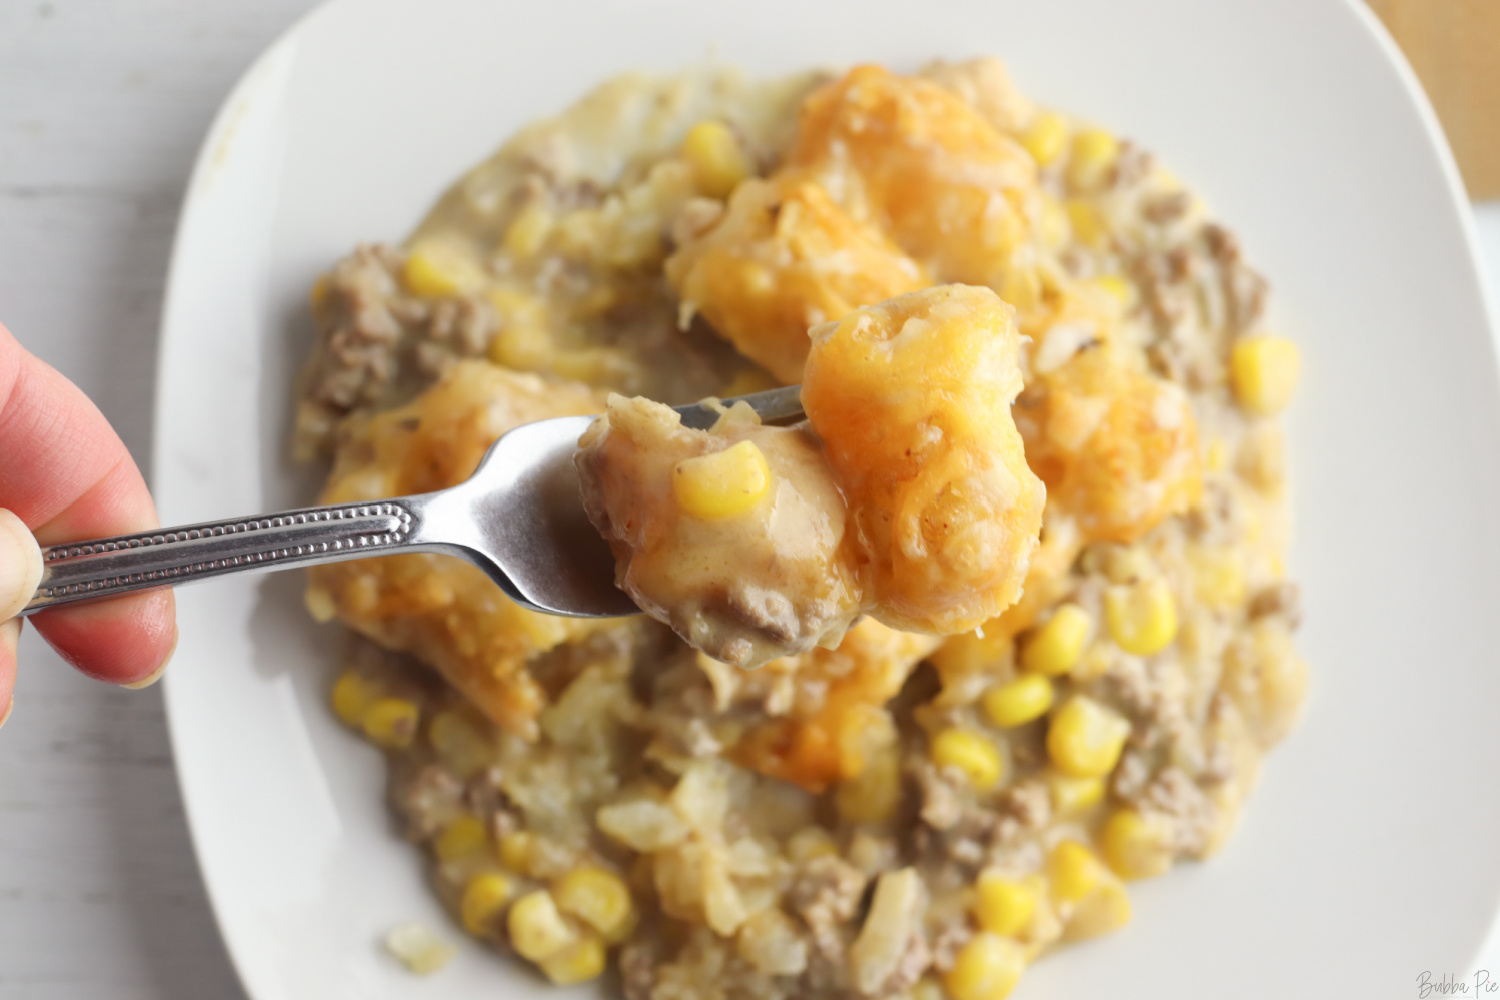 Cowboy Casserole made with ground beef and tater tots